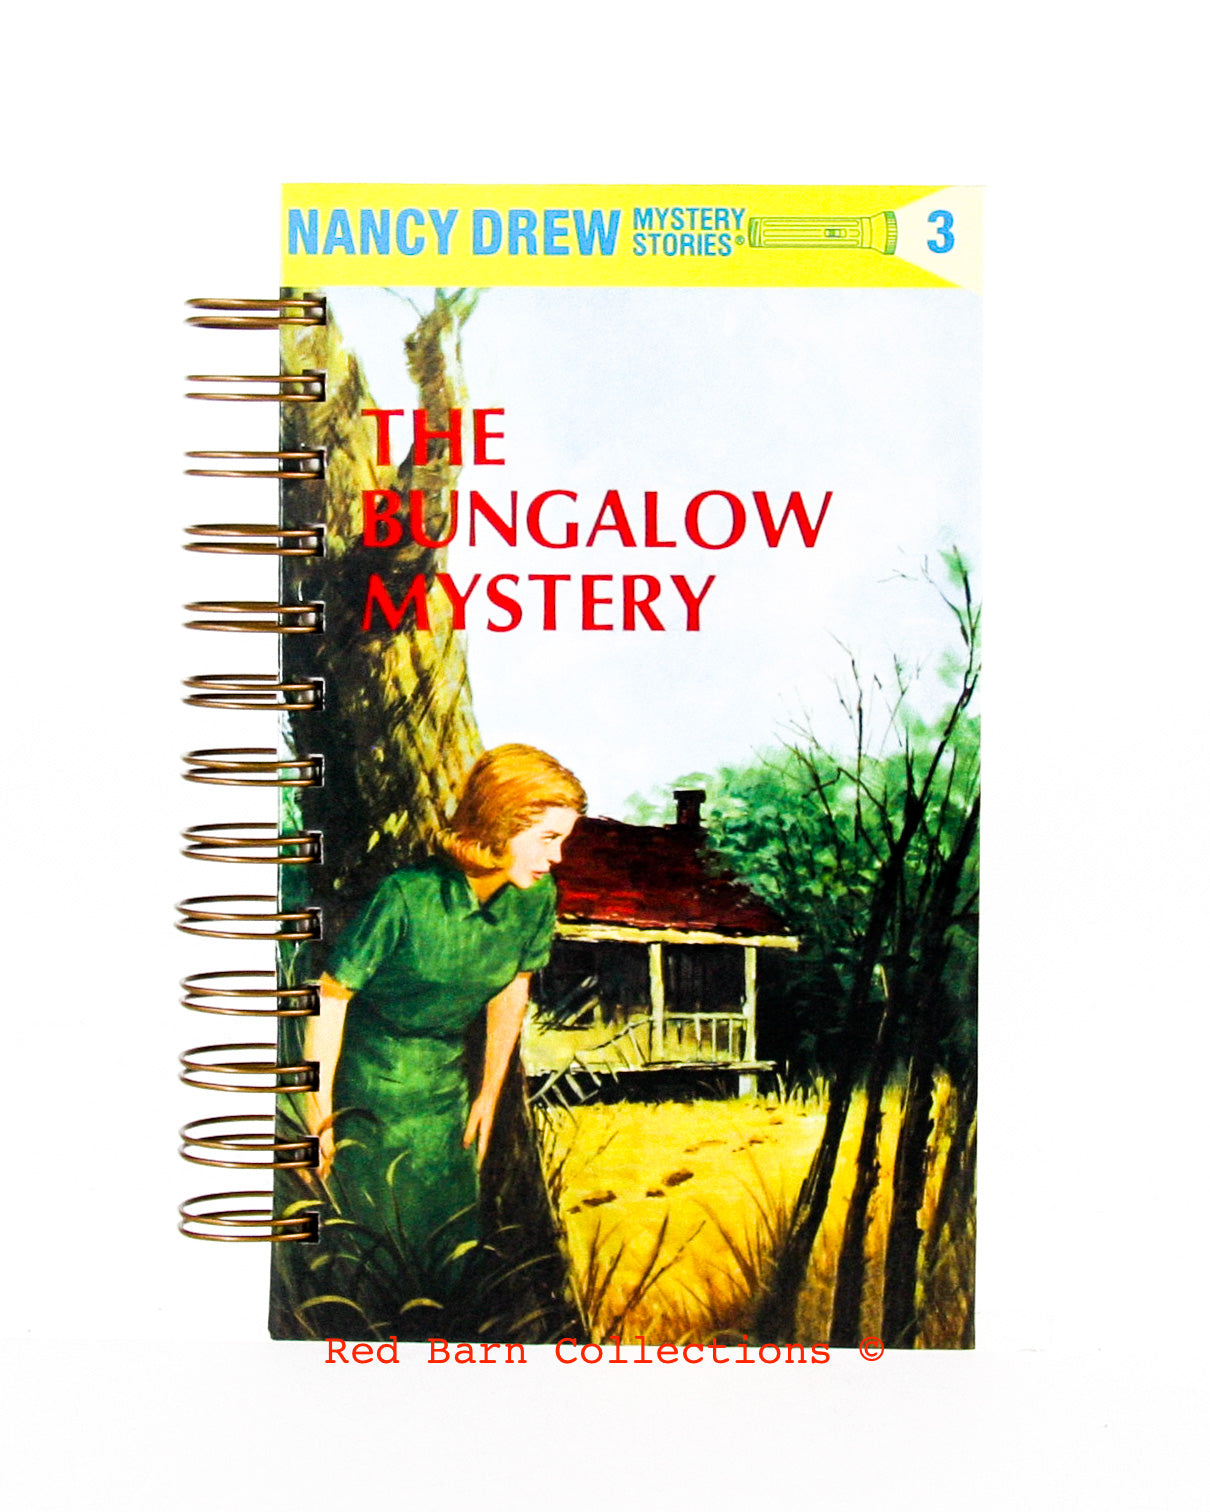 Nancy Drew Holiday Deal-Red Barn Collections